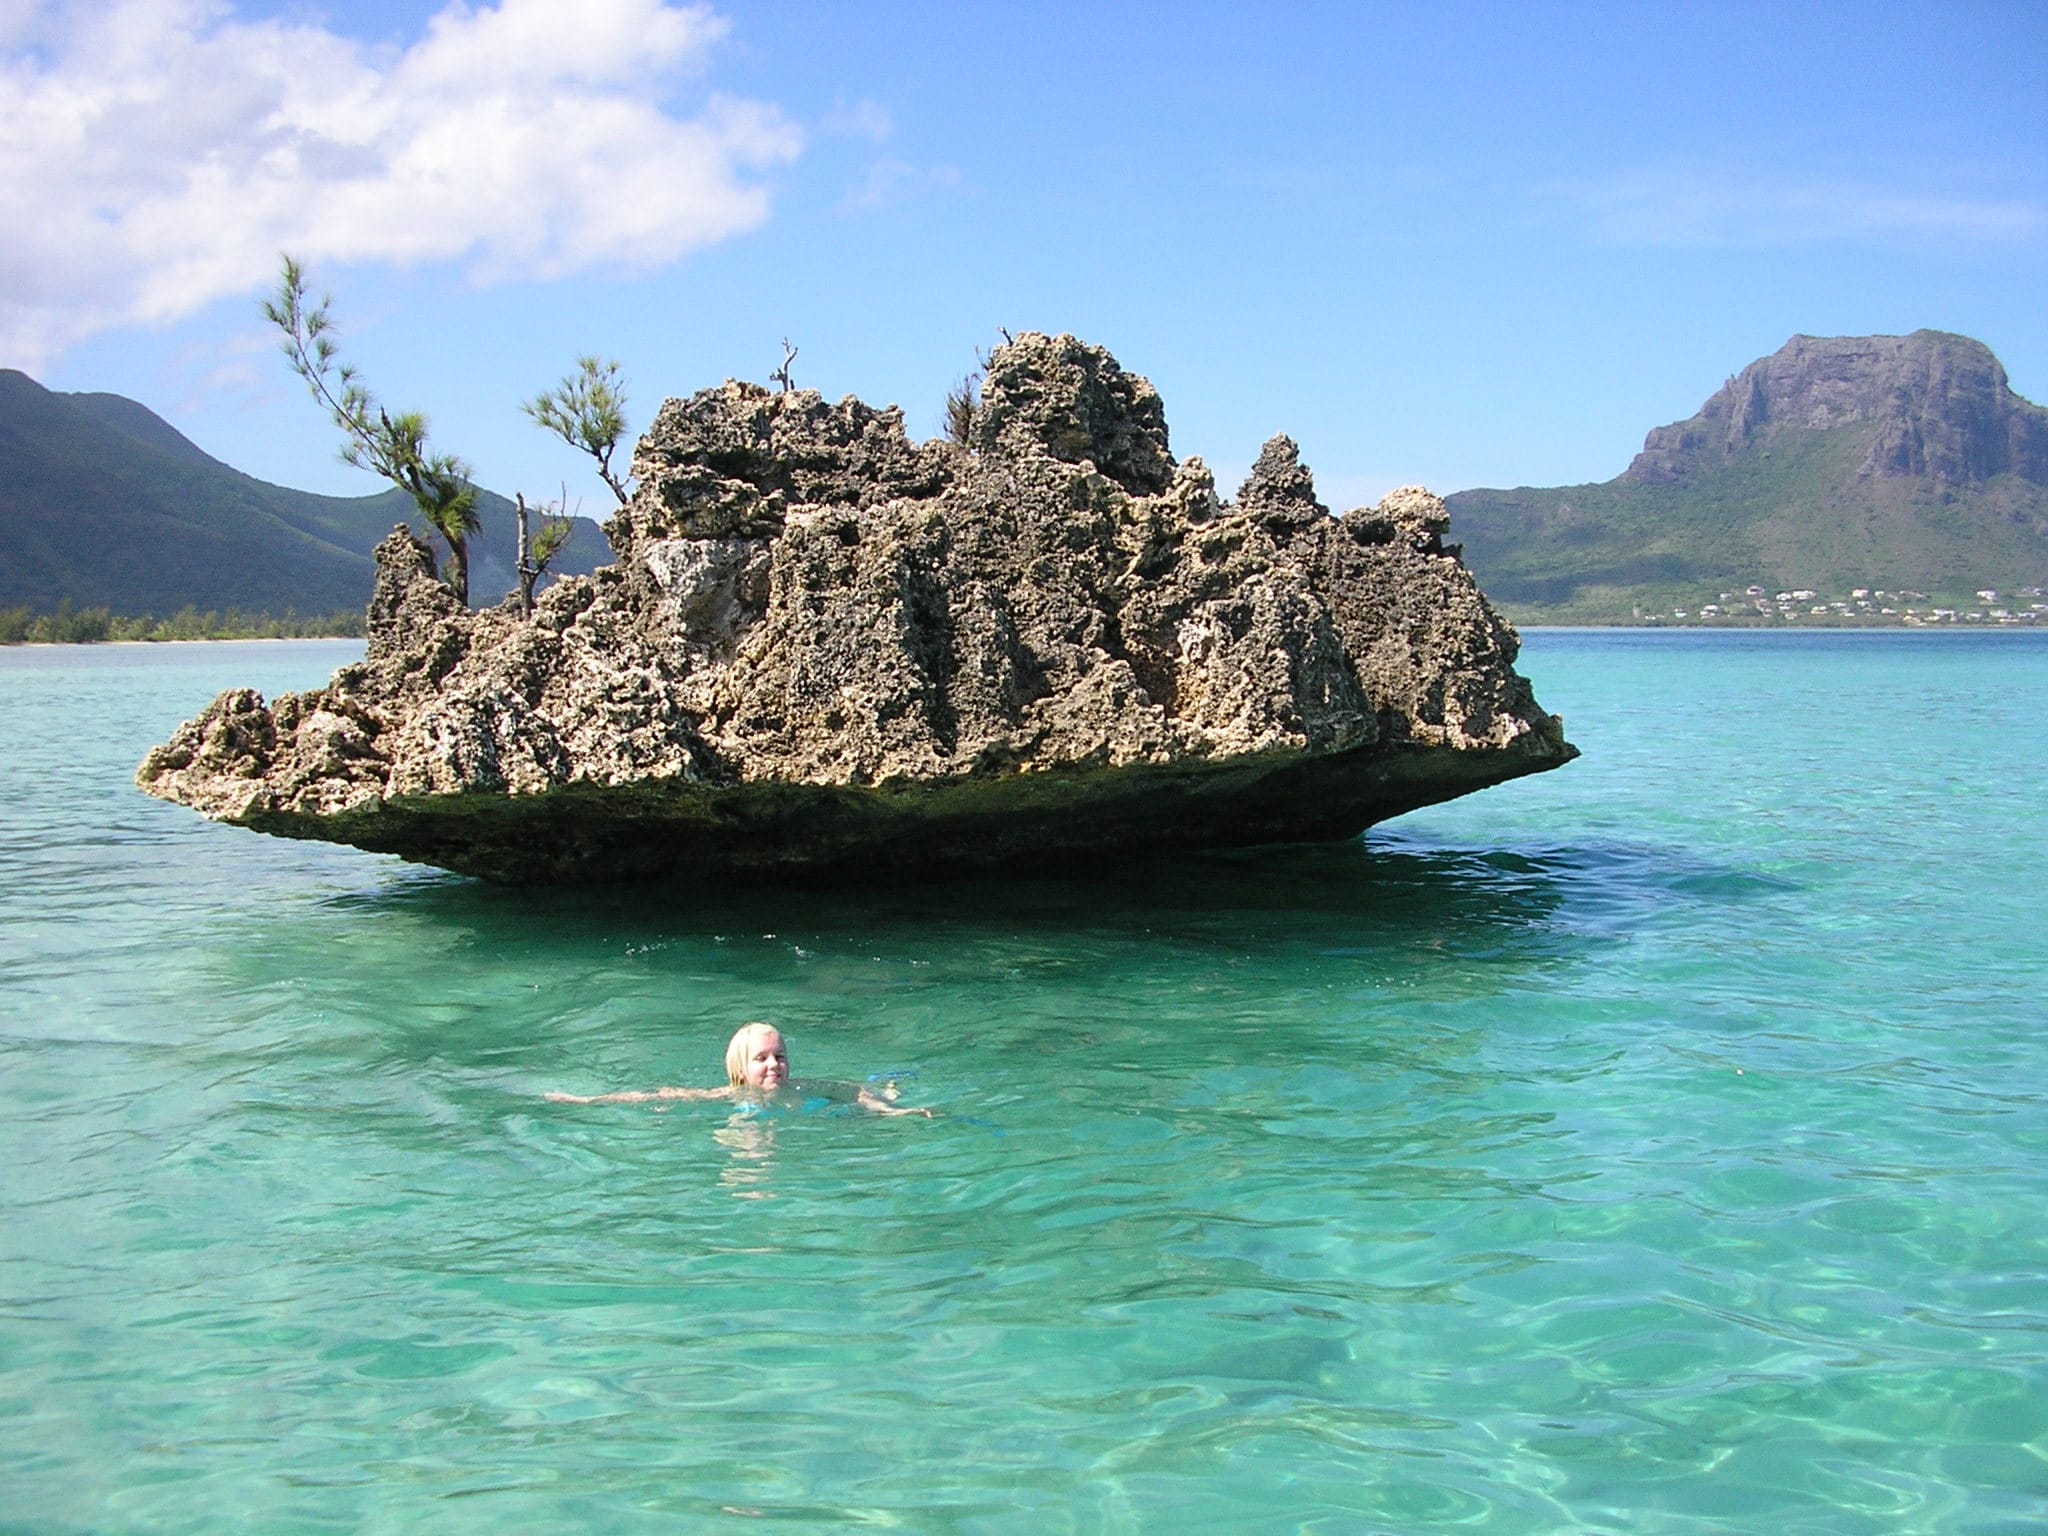 Whale Rock is great for snorkelling where hammerhead sharks may be spotted